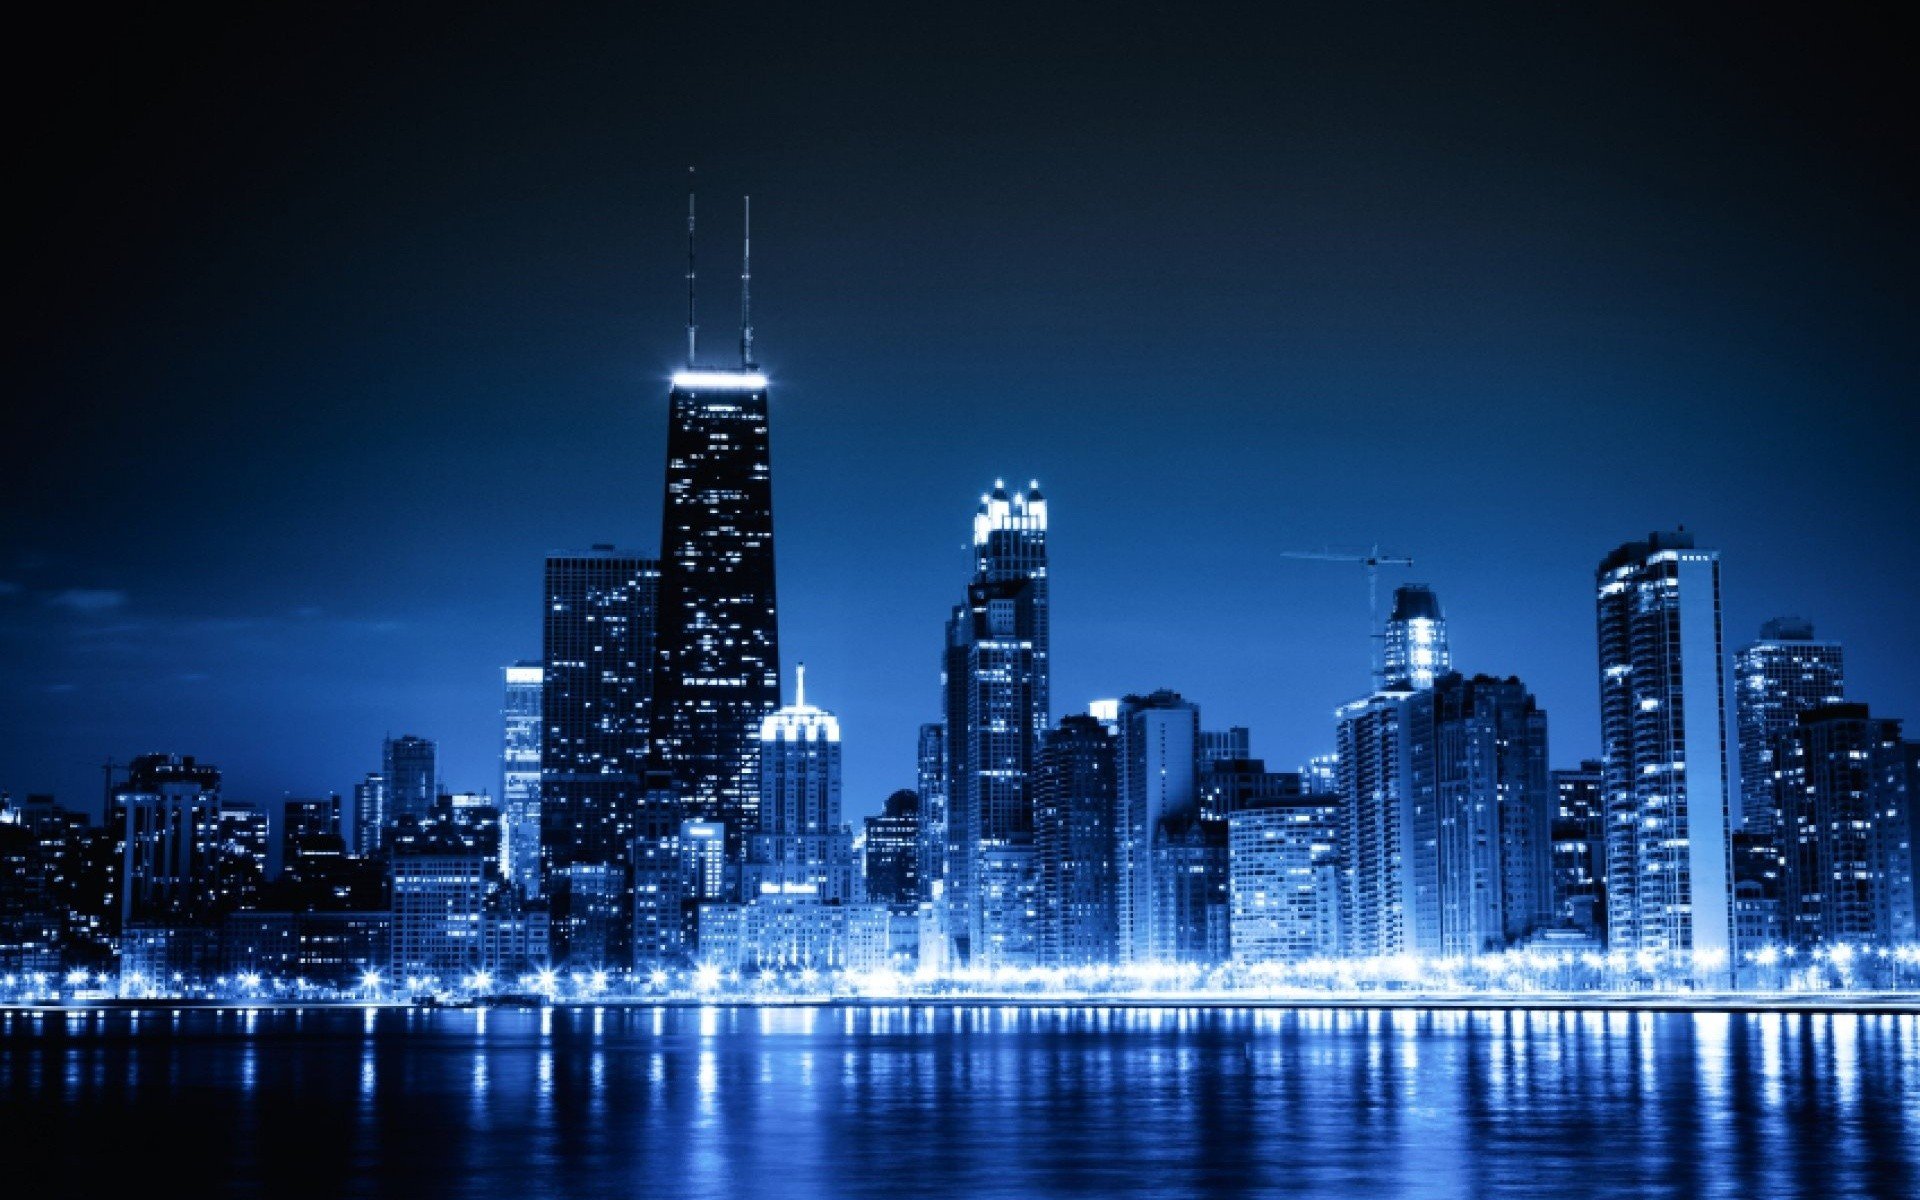  cityscapes Chicago night lights urban skyscrapers wallpaper background 1920x1200